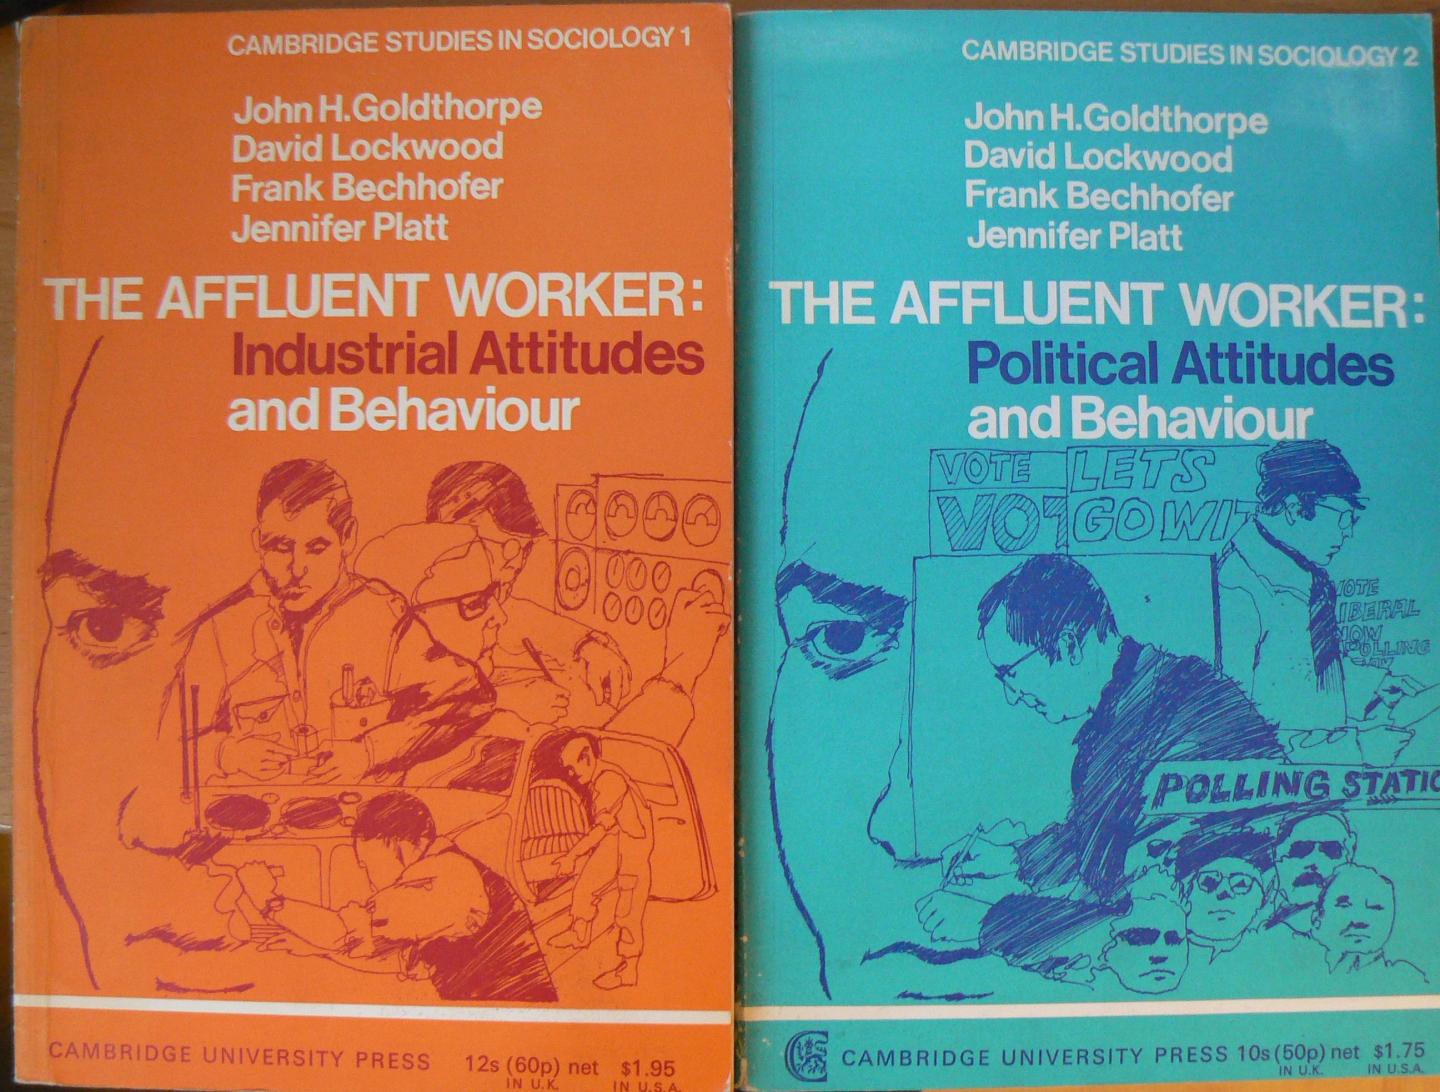 David Lockwood;John H. Goldthorpe - The Affluent Worker in the Class Structure